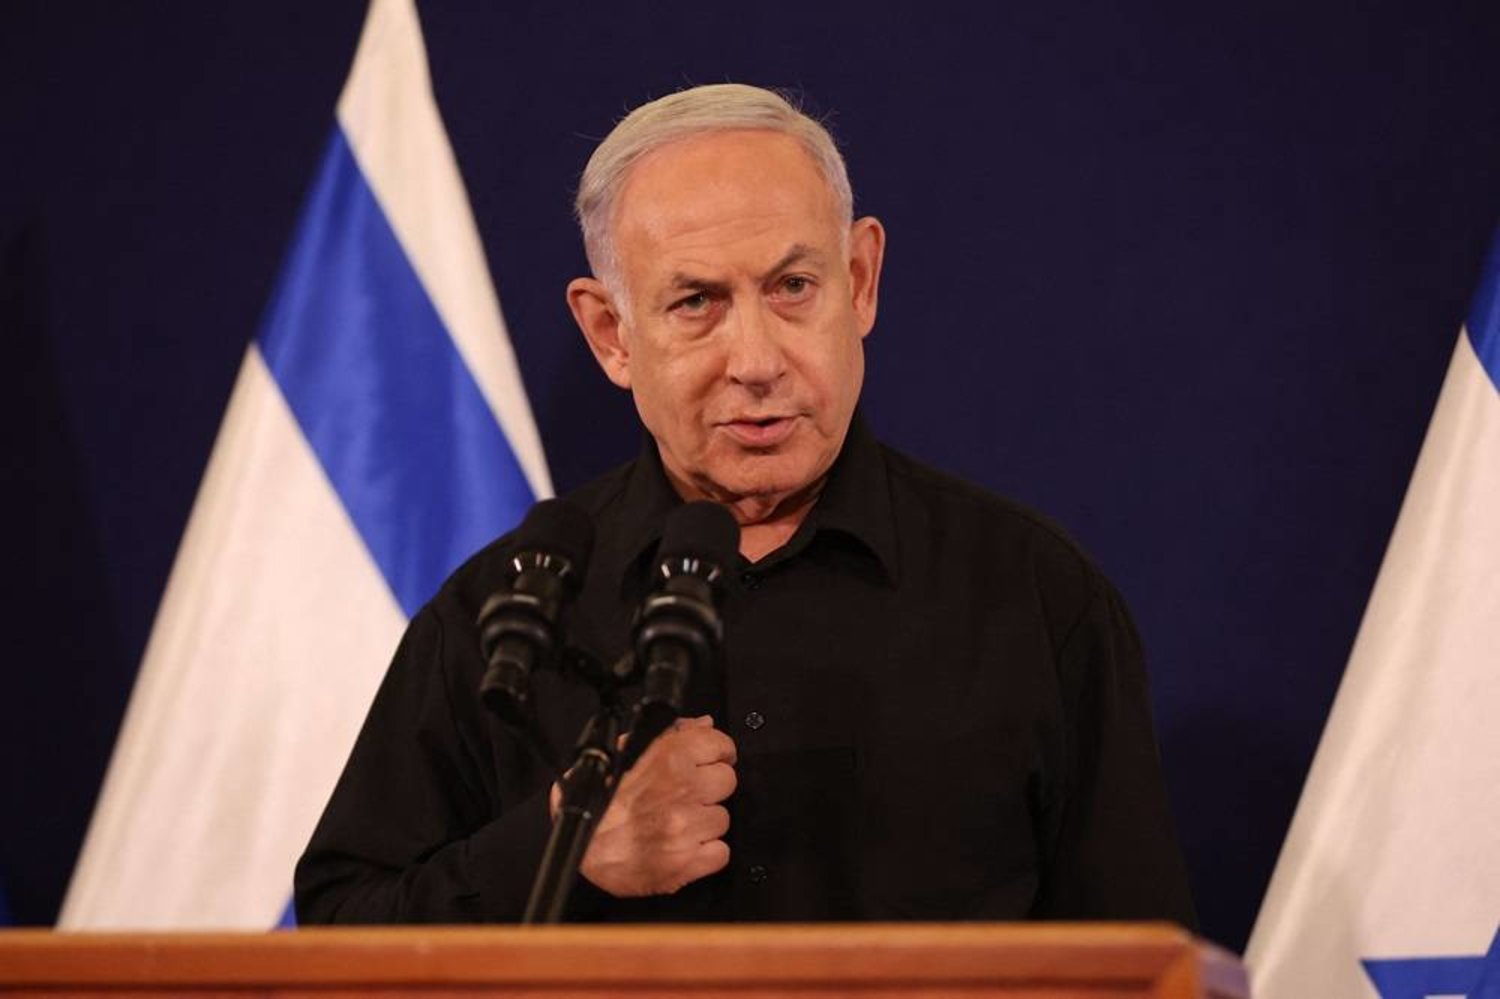 Netanyahu underscores Israel's unwavering stance against any threats (Credits: AFP)